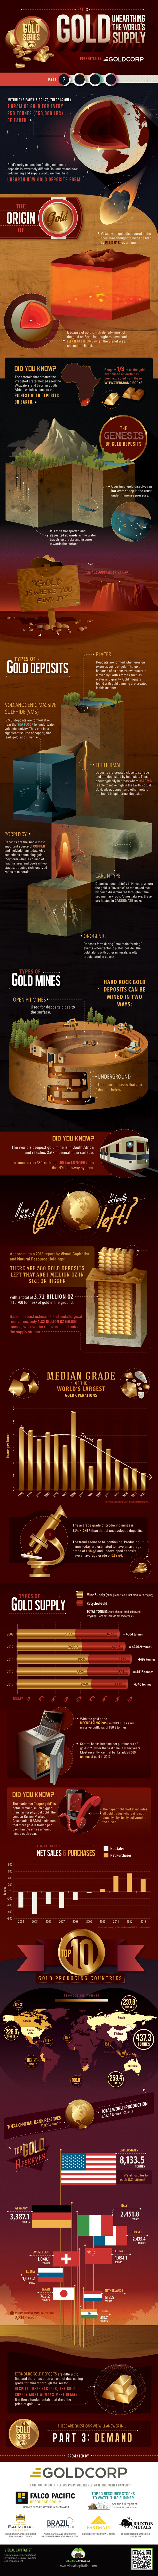 Gold Series Part 2 infographic